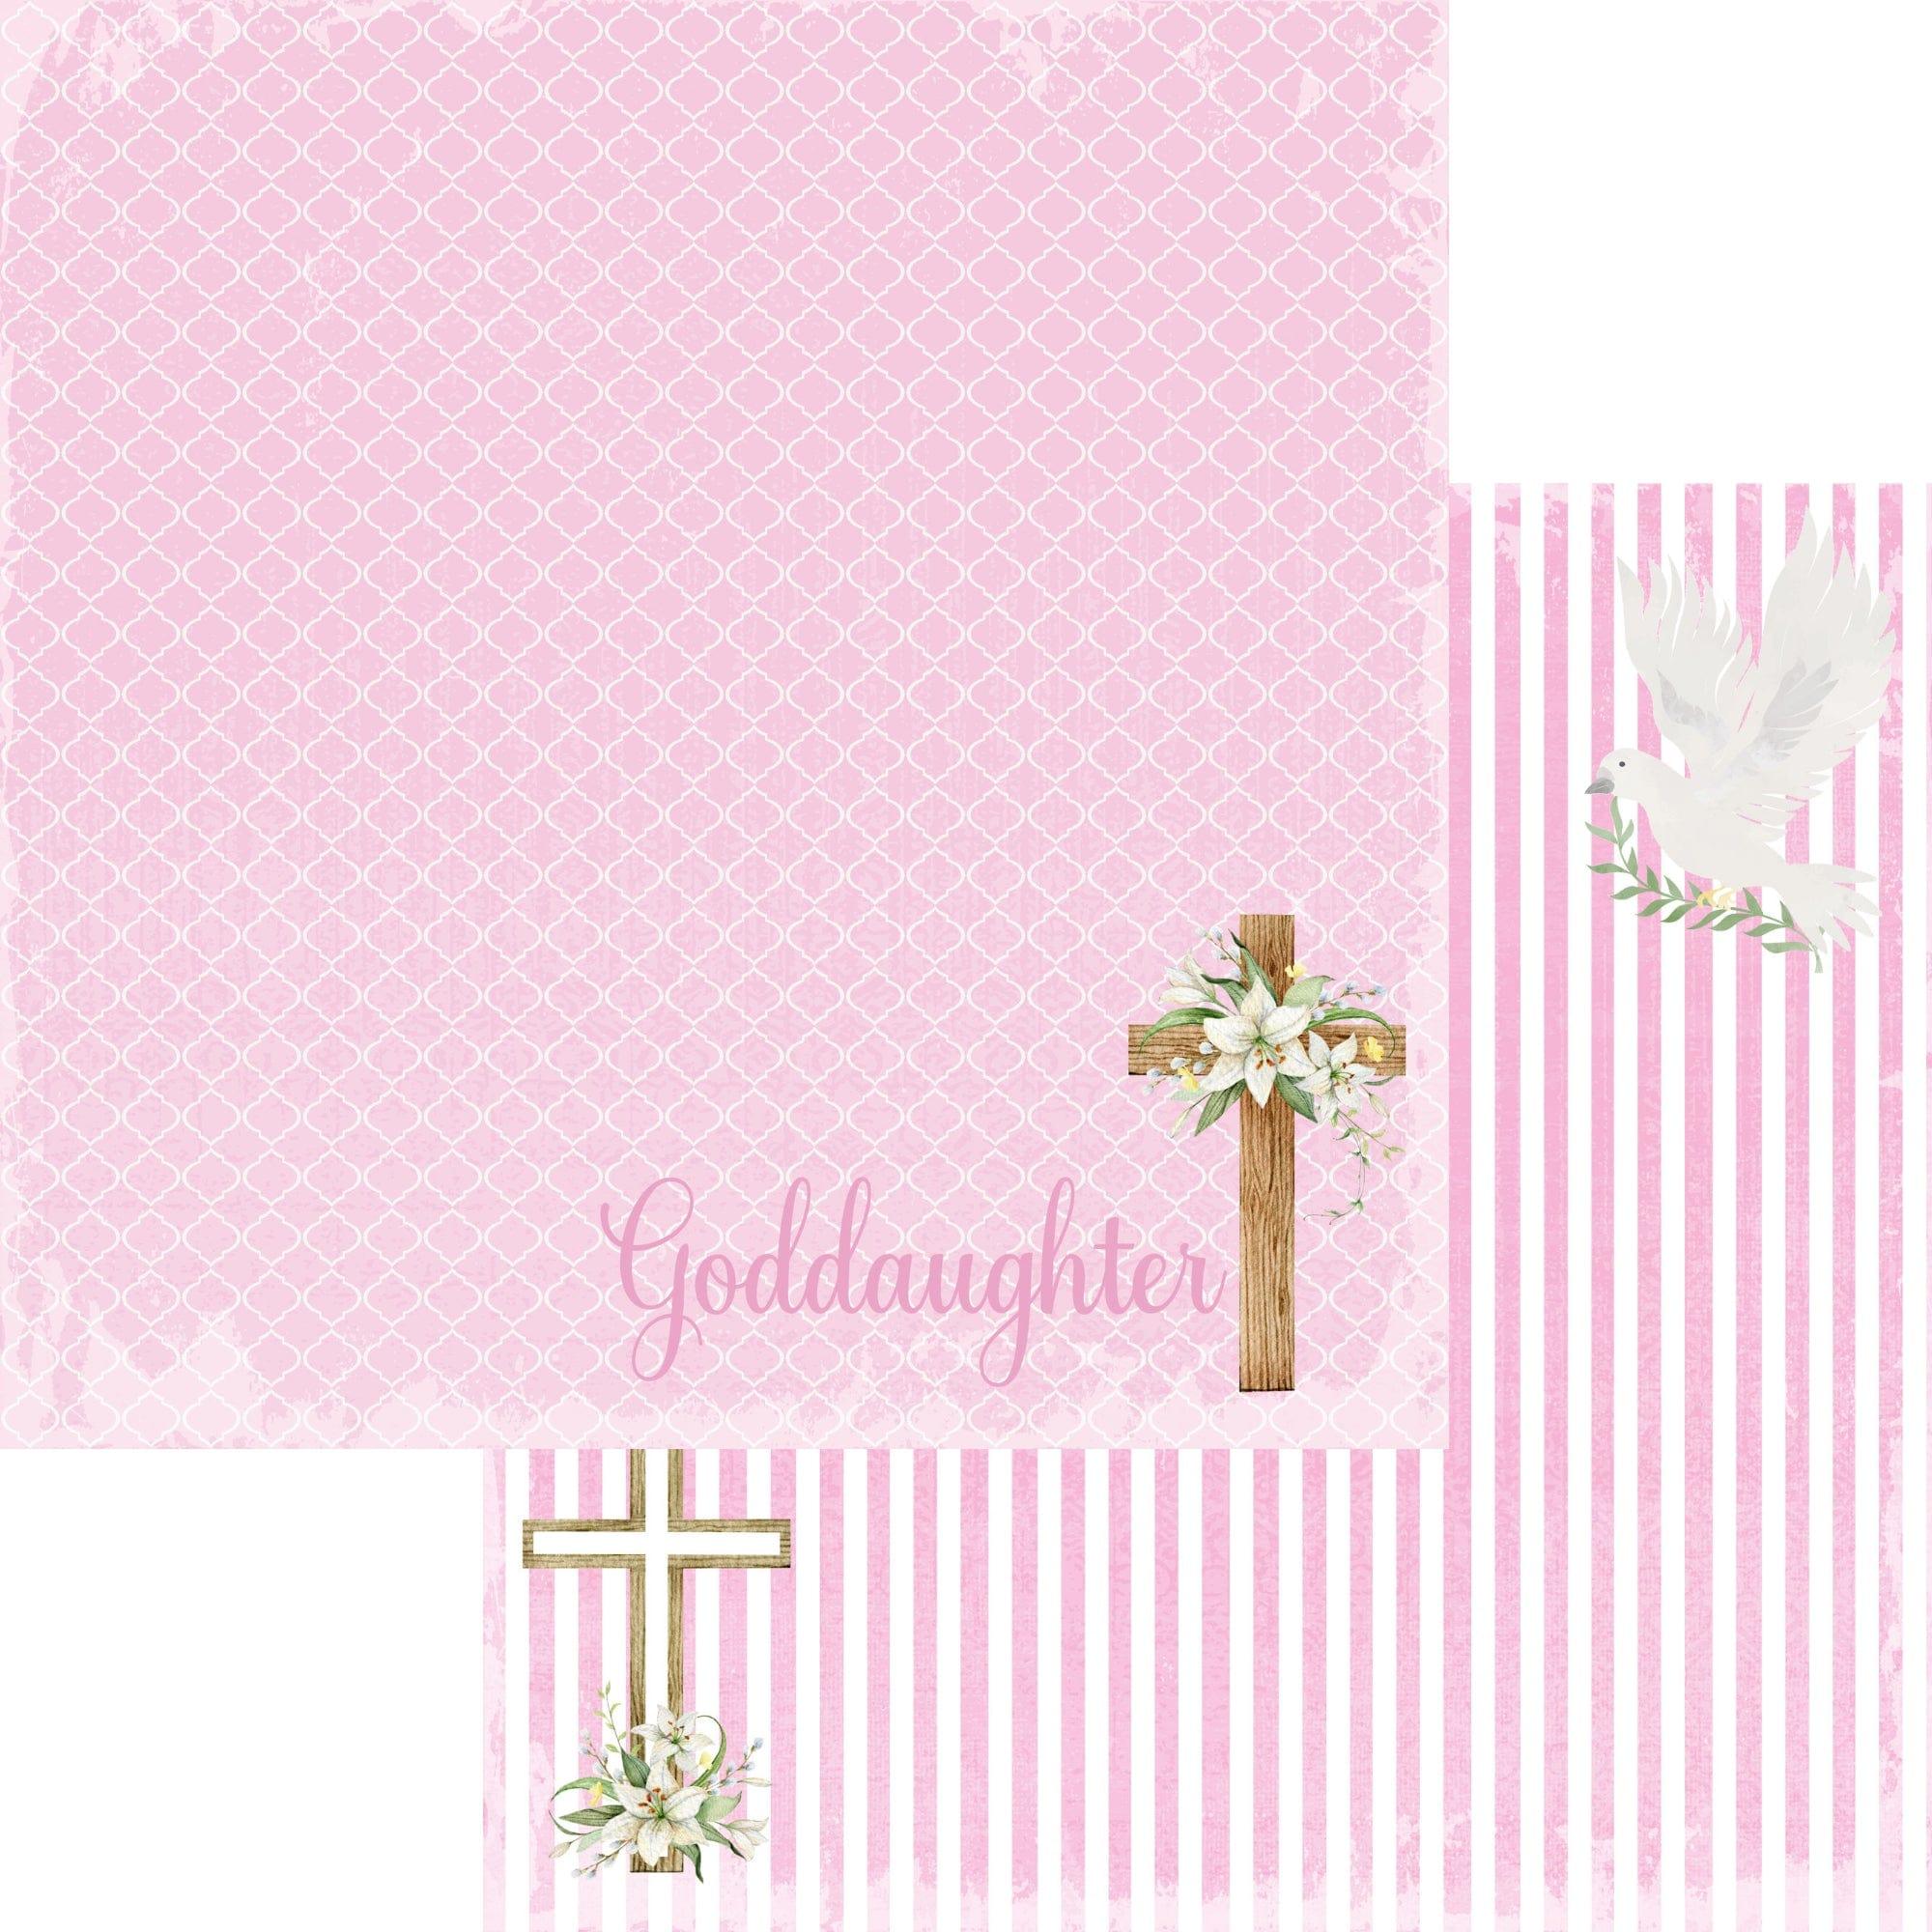 Holy Sacraments Collection Goddaughter 12 x 12 Double-Sided Scrapbook Paper by SSC Designs